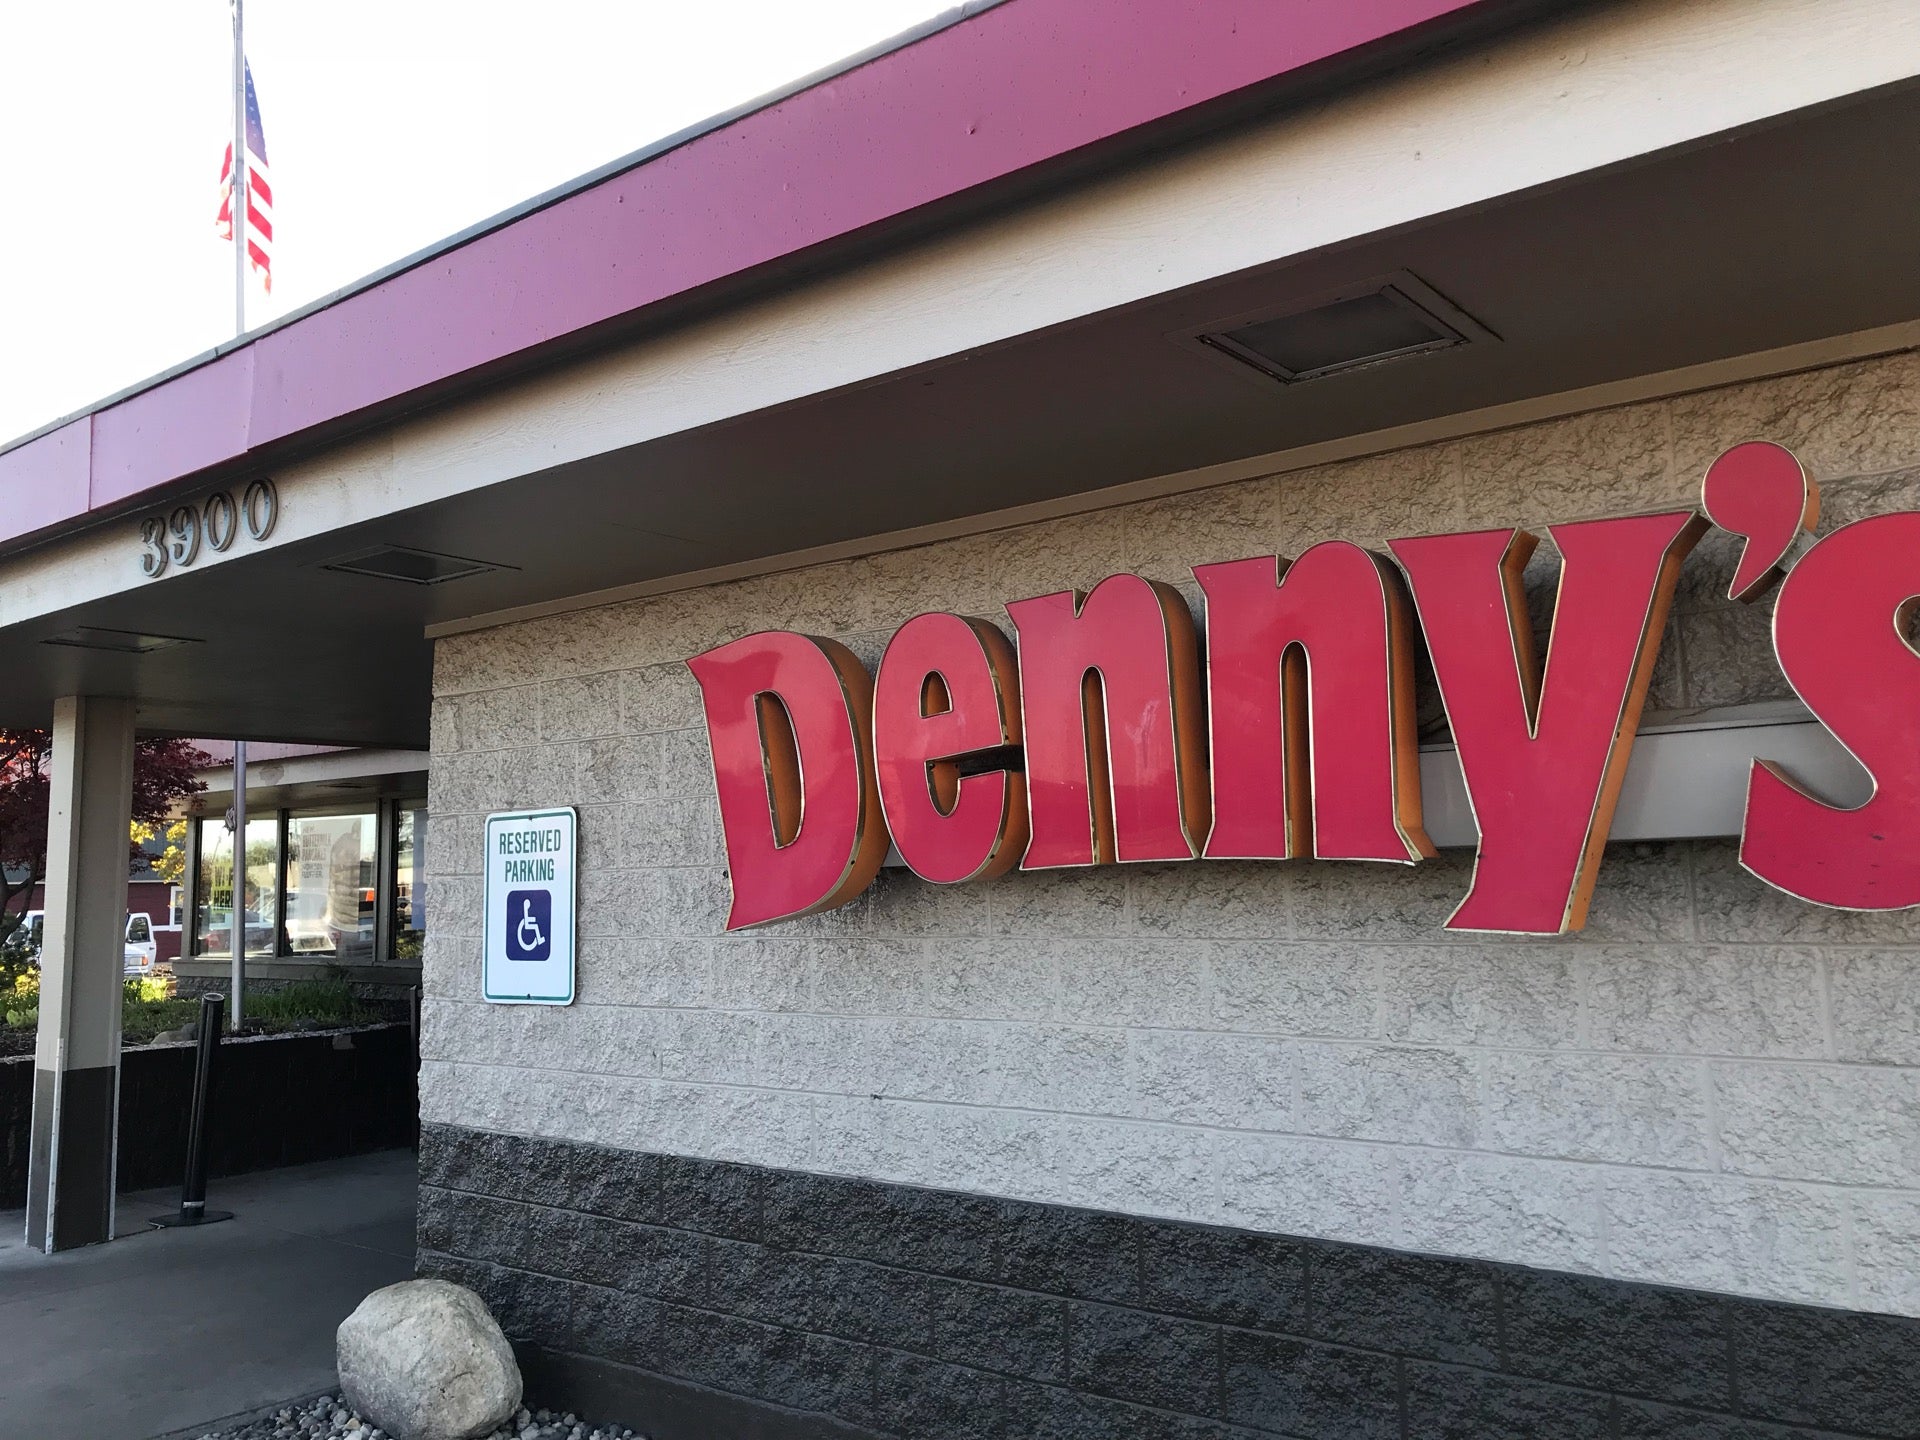 Denny's, 3900 28th Street Se, Kentwood, MI, Subs & Sandwiches